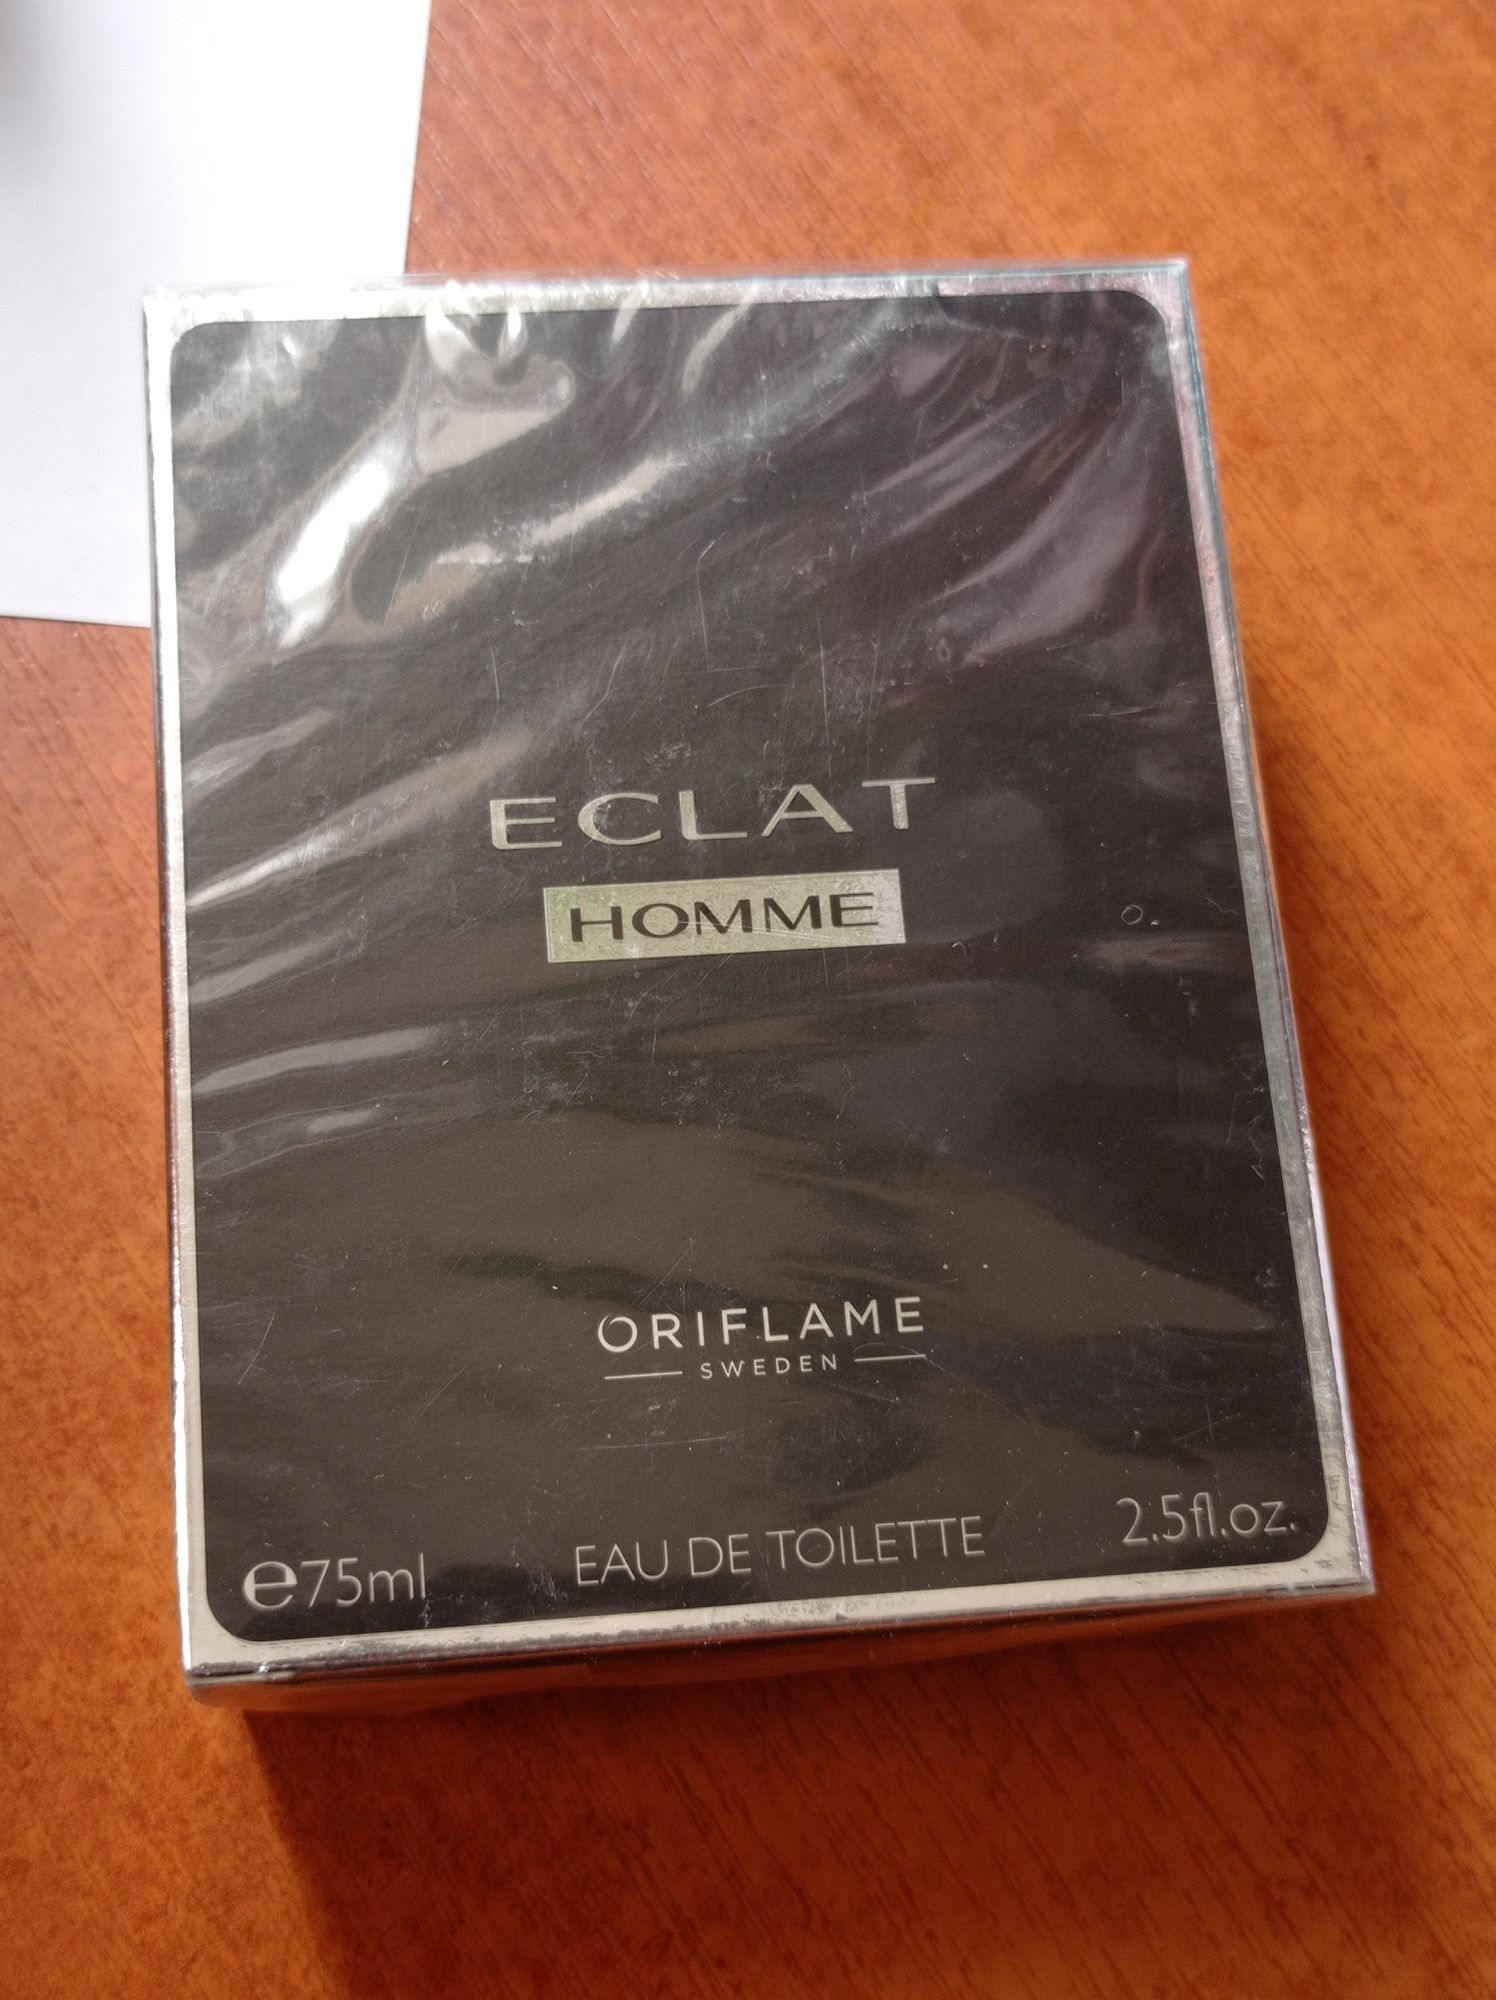 Eclat homme Oriflame